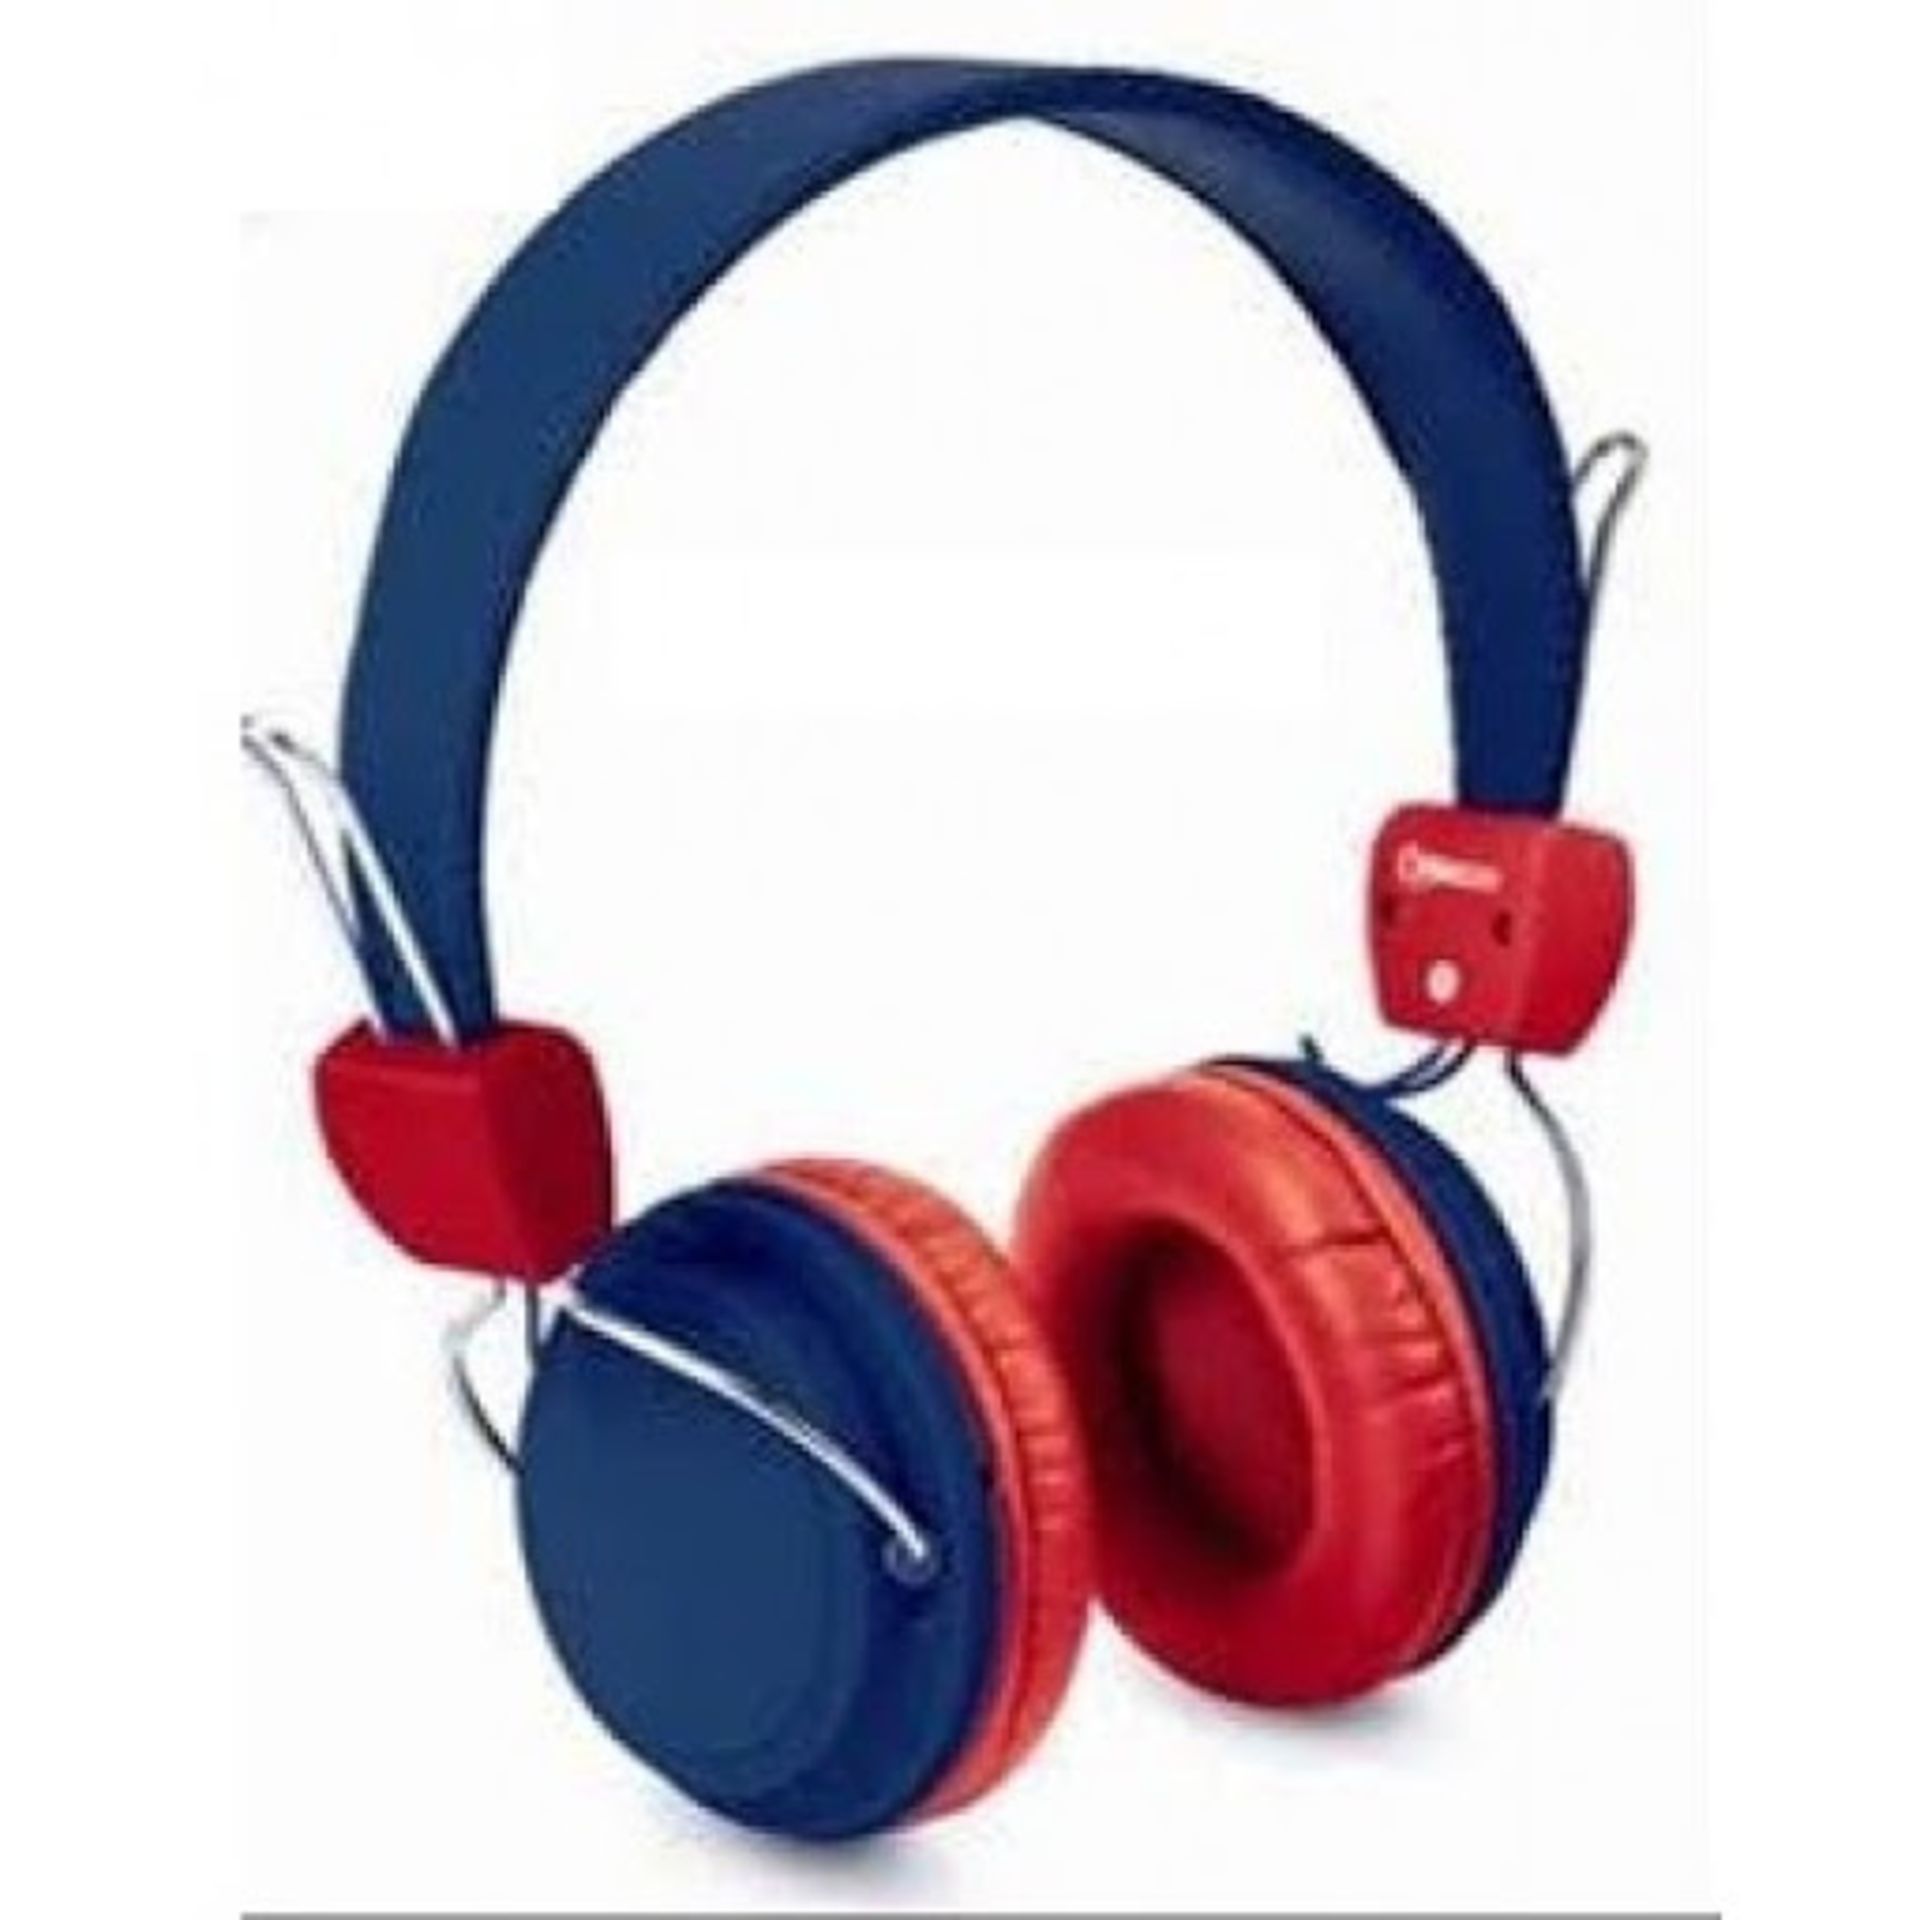 Kidzsafe Headphones By SMS Audio With Volume-Limiting Technology - New RRP 24.99